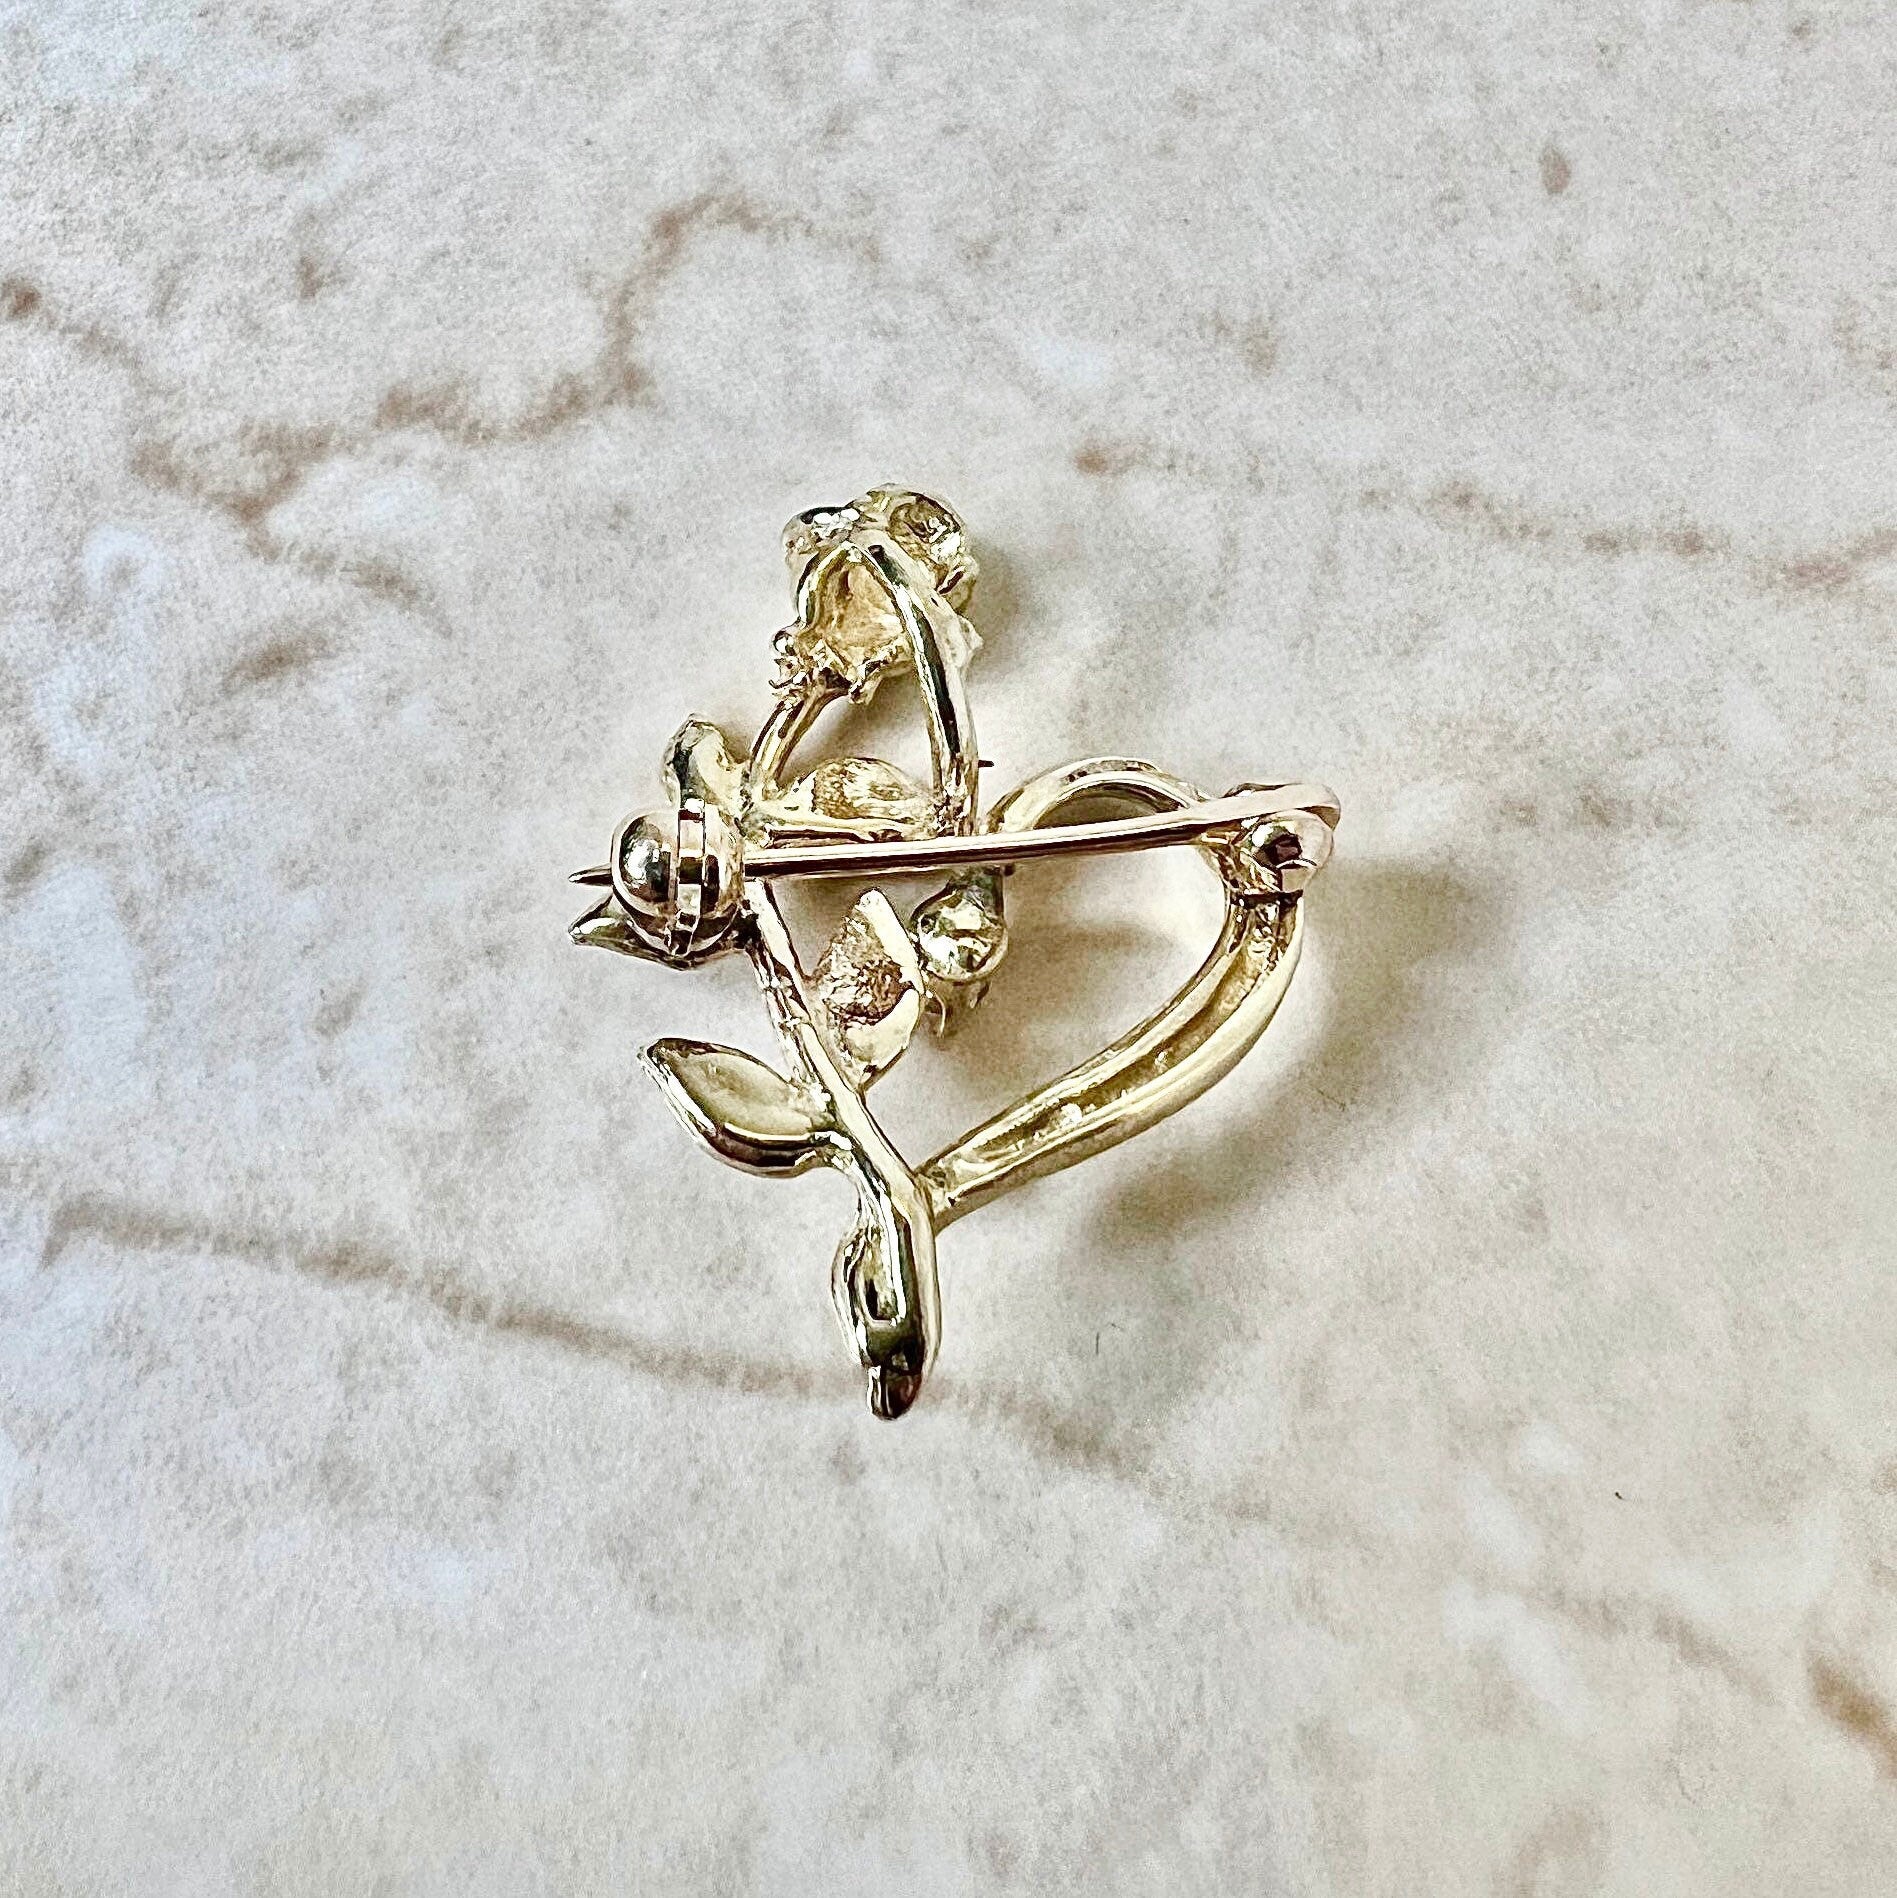 14K Diamond Heart Pendant Necklace & Brooch - Yellow Gold Solitaire Diamond Pendant - Gold Heart Brooch - Valentine’s Day Gifts For Her